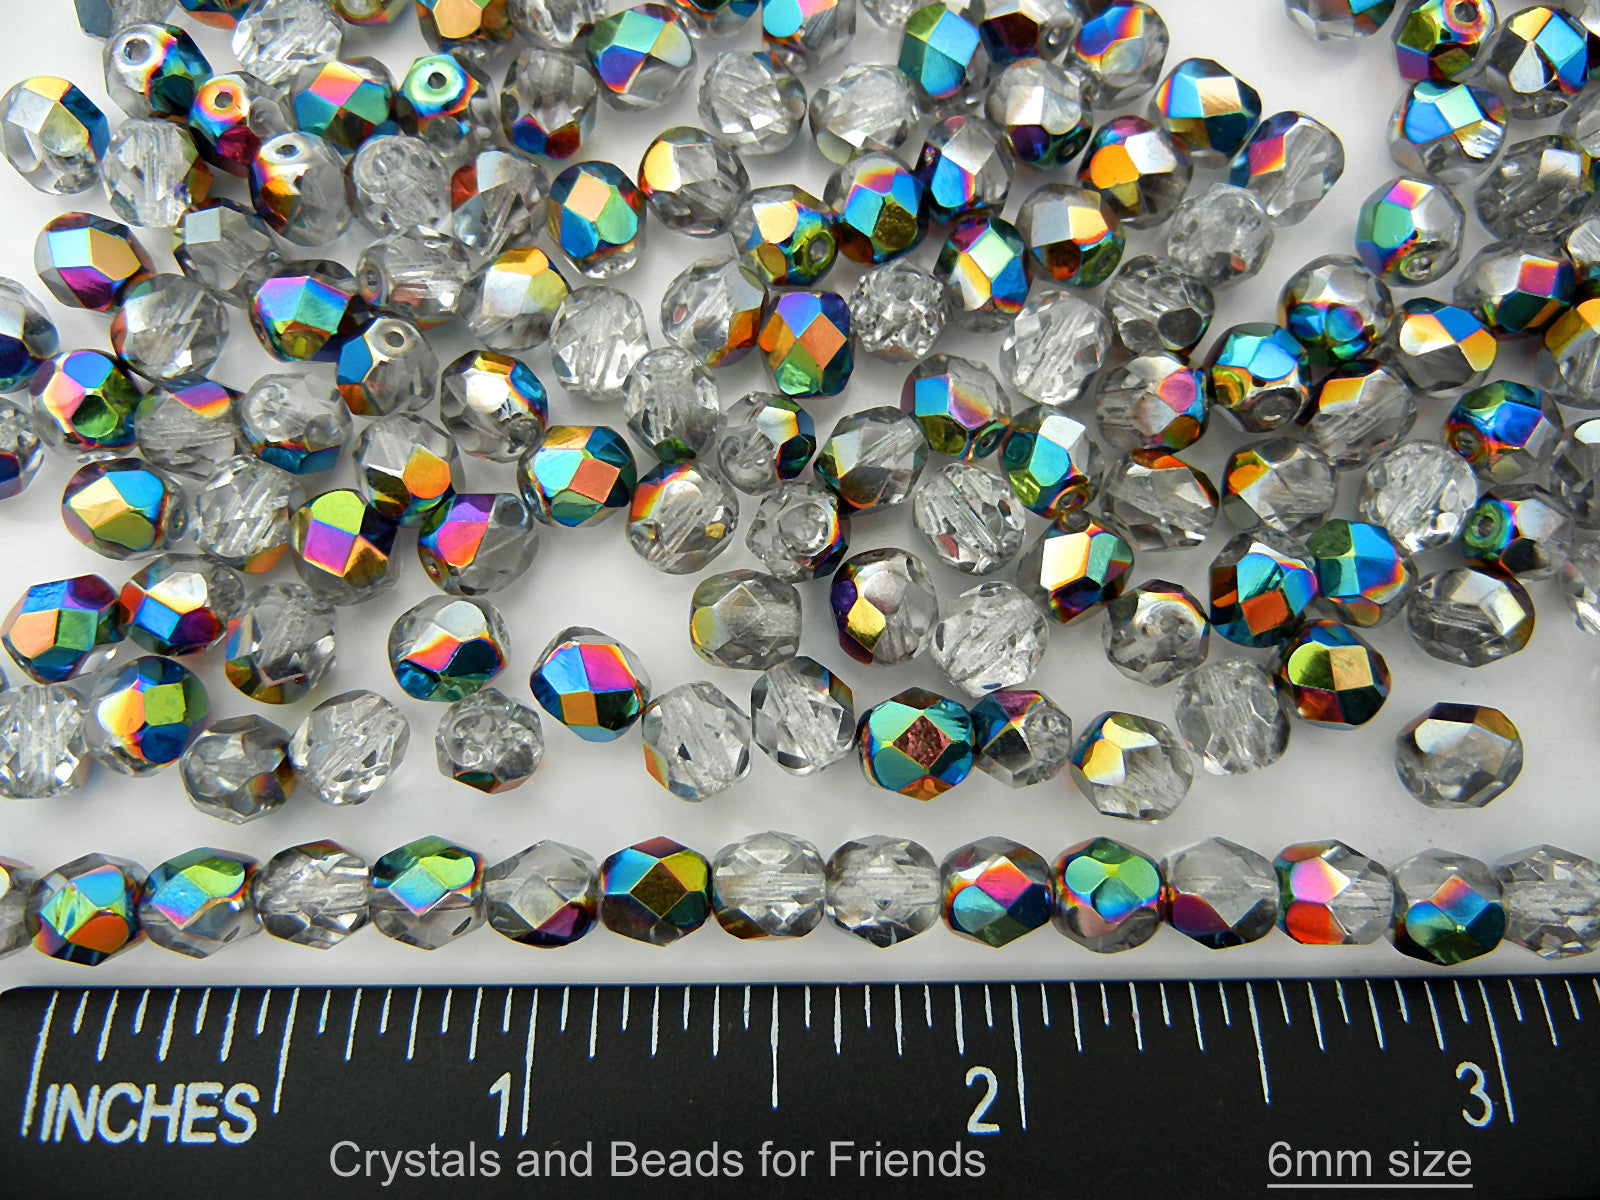 Crystal Vitrail (Vitrail Medium) coated, loose Czech Fire Polished Round Faceted Glass Beads, clear half coated with vitrail green metallic